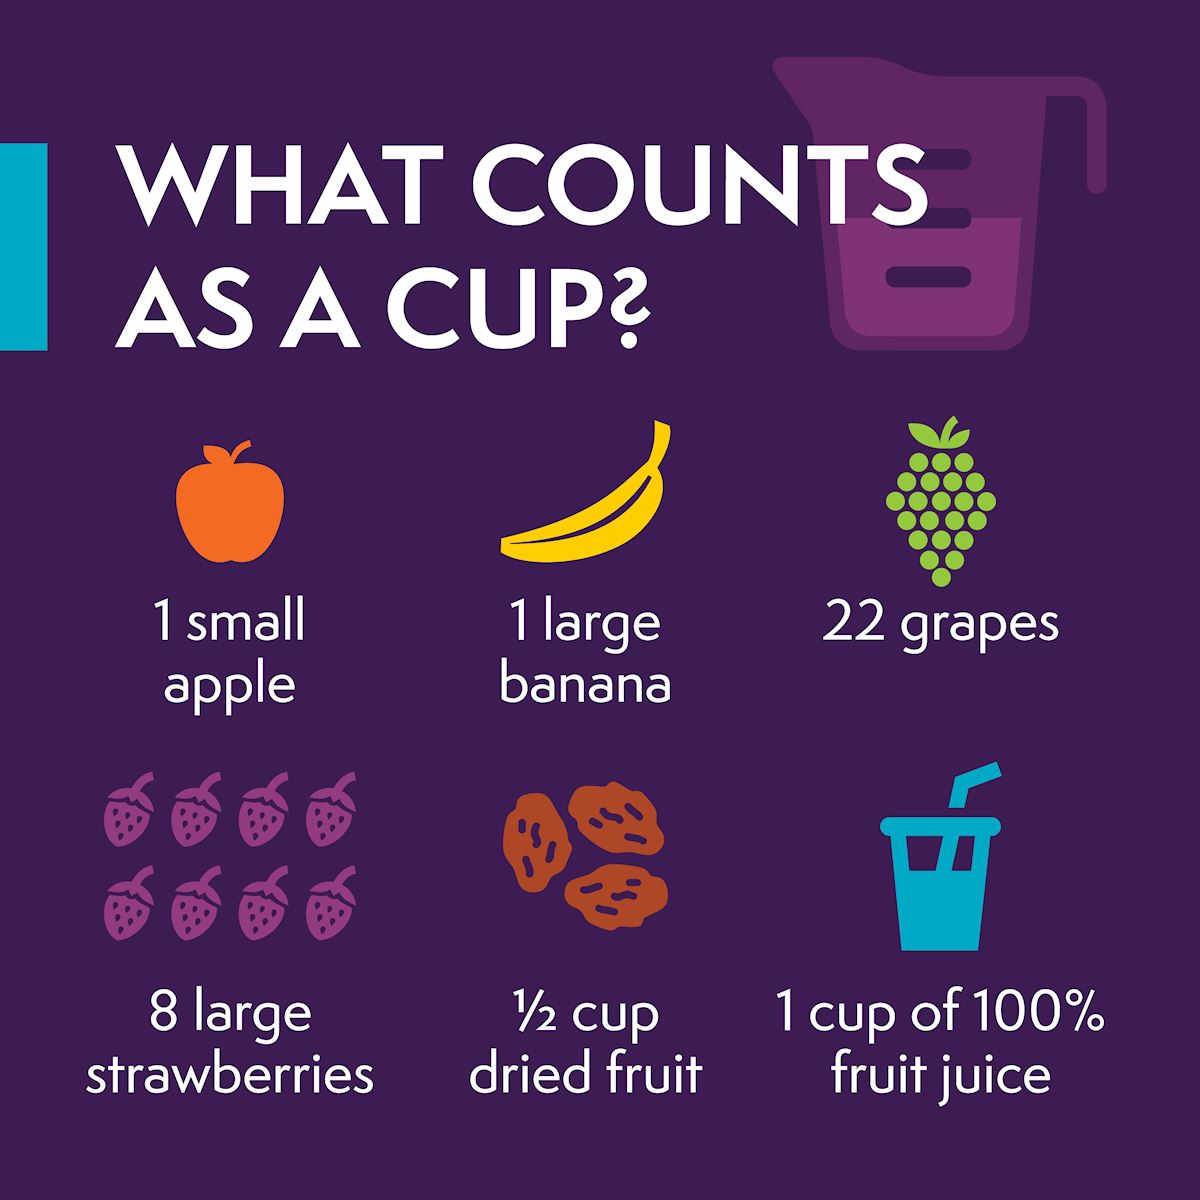 What Counts As A Cup?